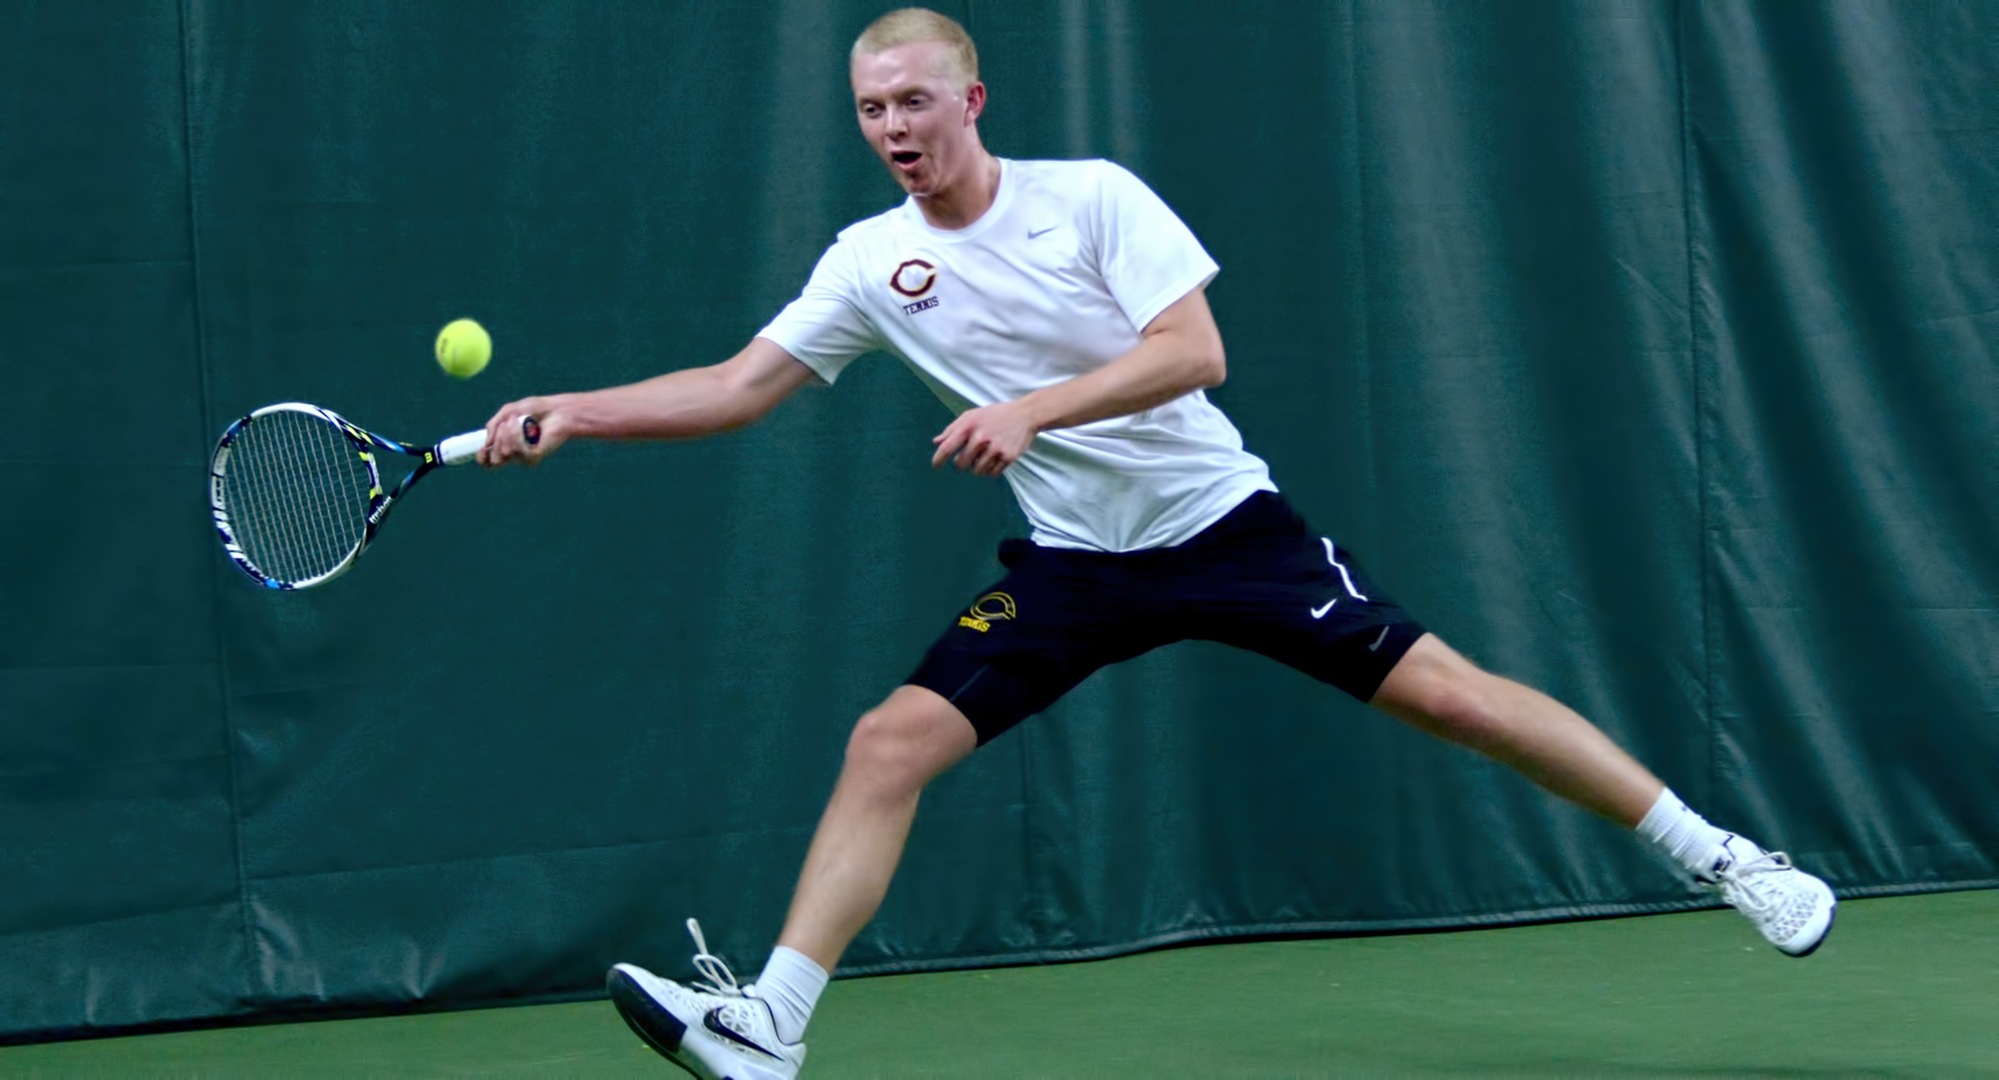 Freshman Jared Saue recorded his first collegiate singles win in the Cobbers' 9-0 win over Bethany Lutheran on Sunday.